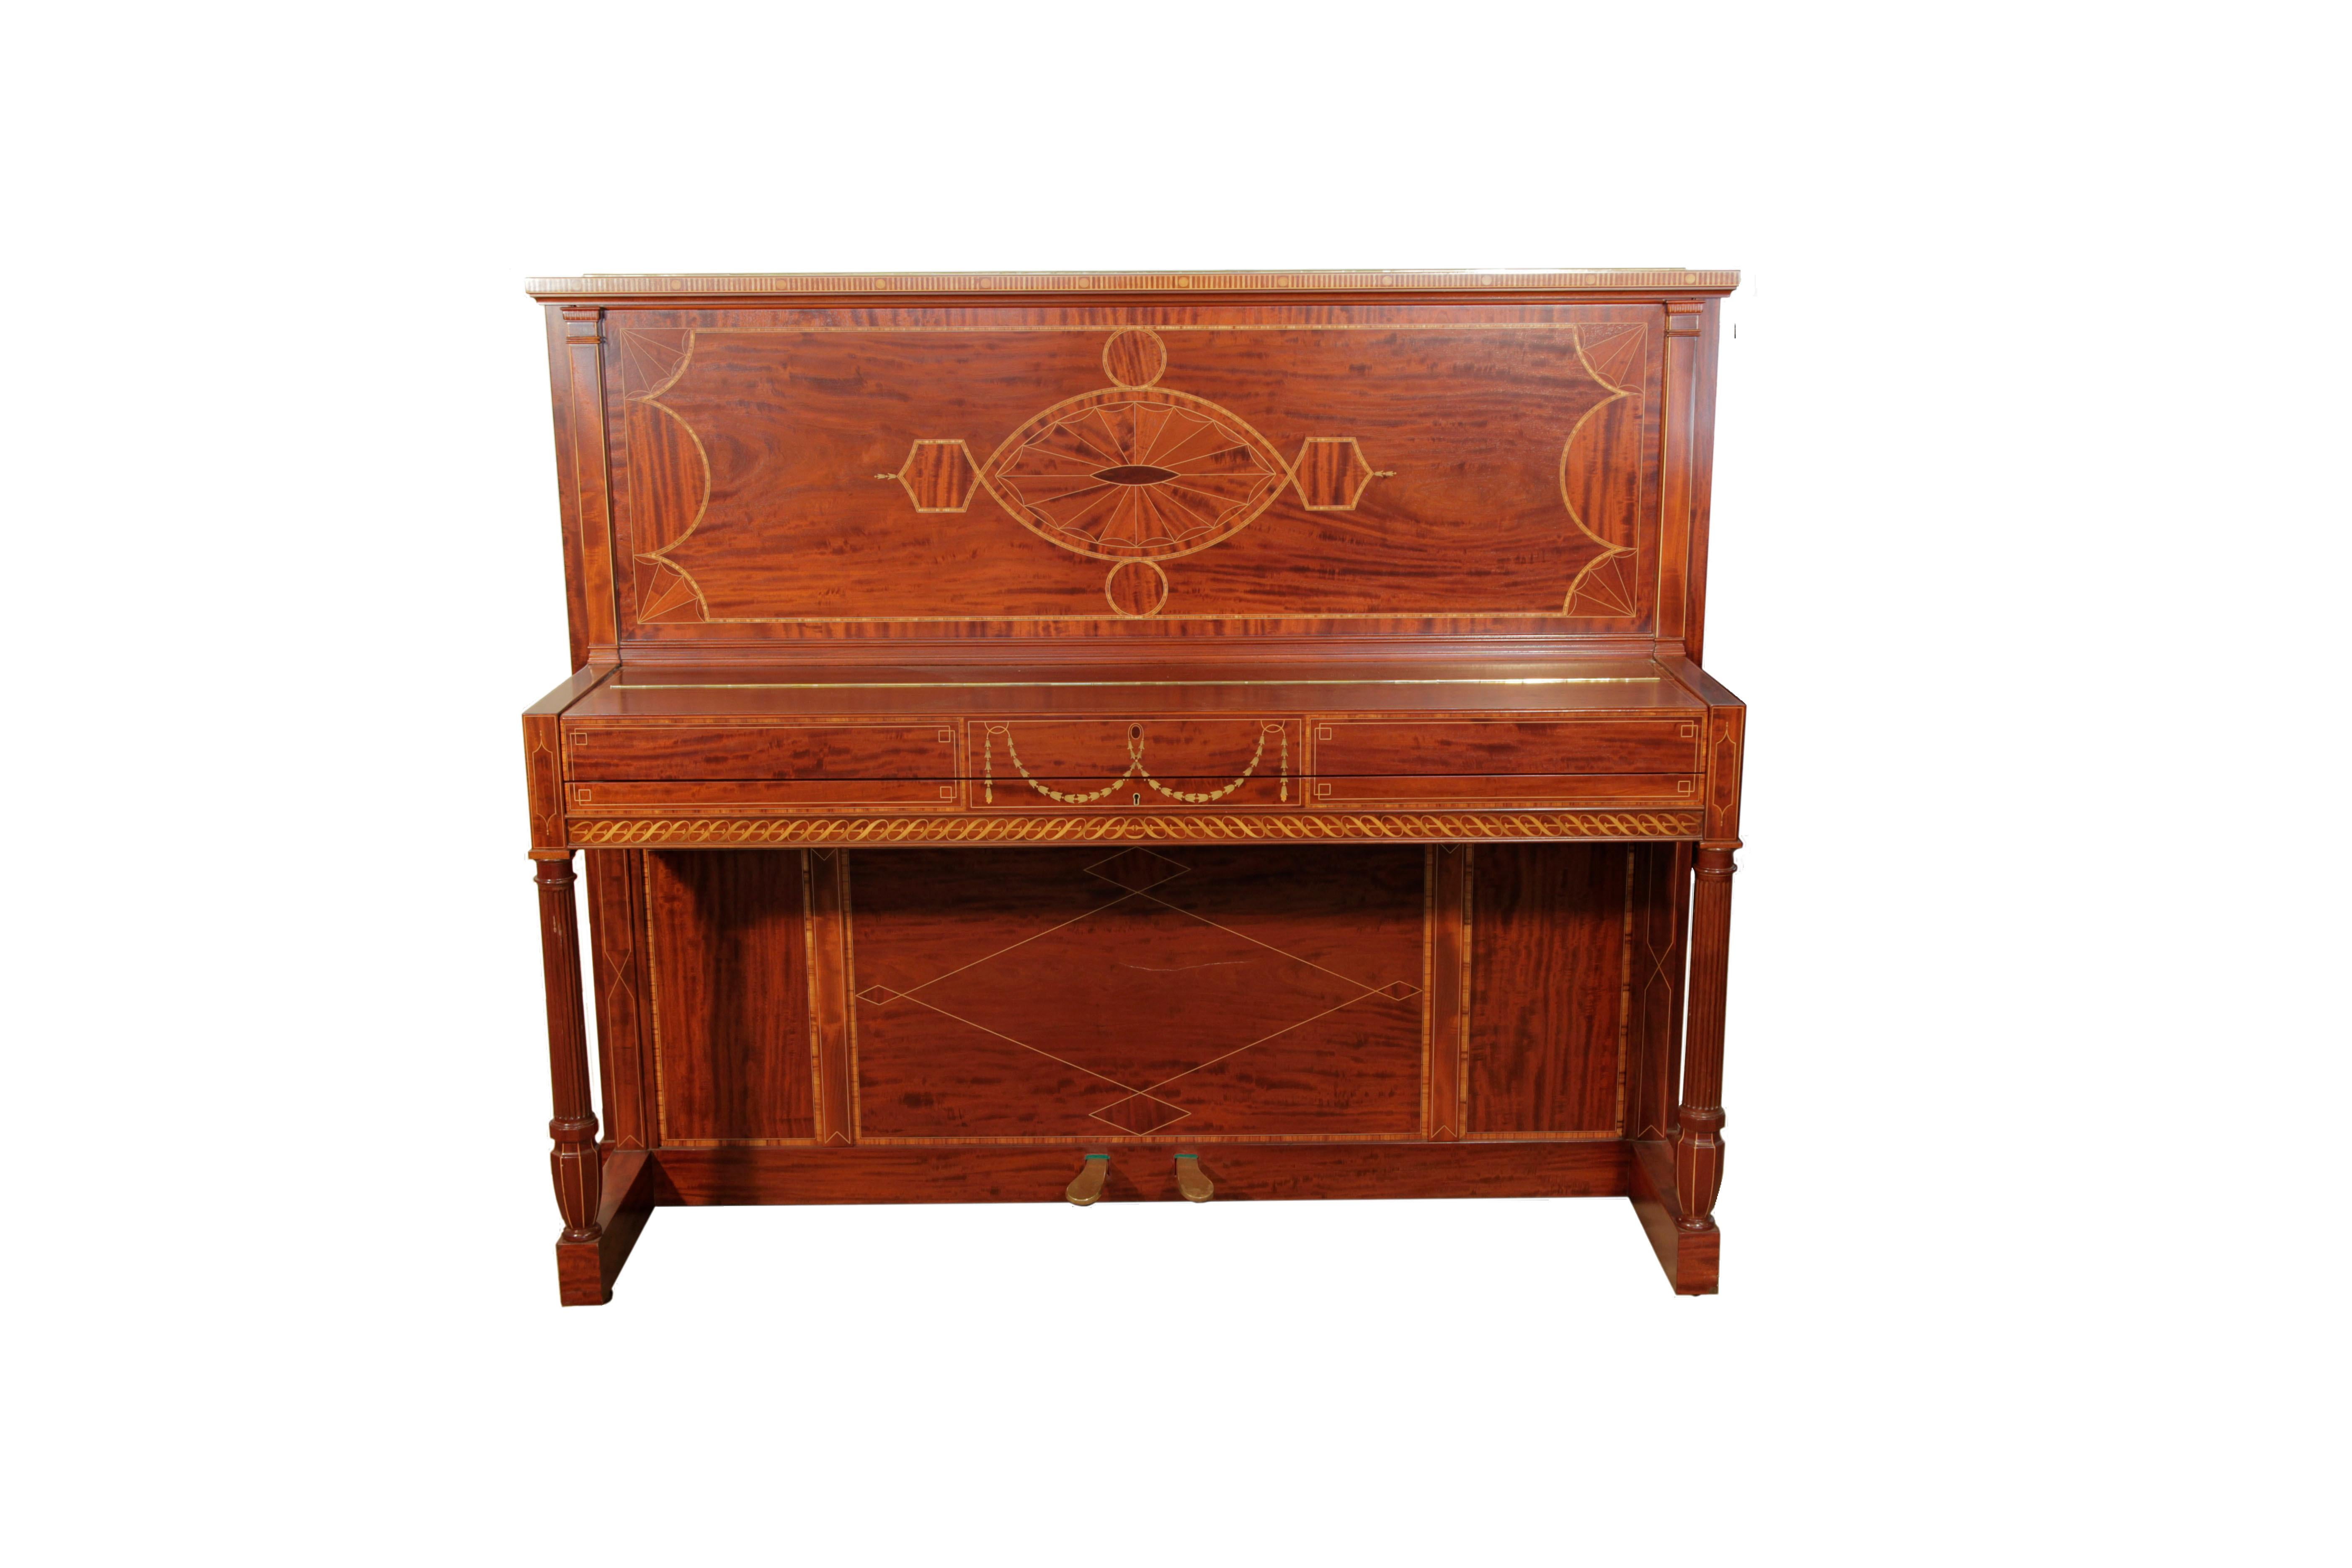 A 1912, Weber upright piano for sale with a figured, mahogany case. Piano has fluted Doric style piano legs with an urn shaped pedestal.
Entire cabinet is inlaid in a variety of woods with stylised Neoclassical motifs and geometric forms. 
The